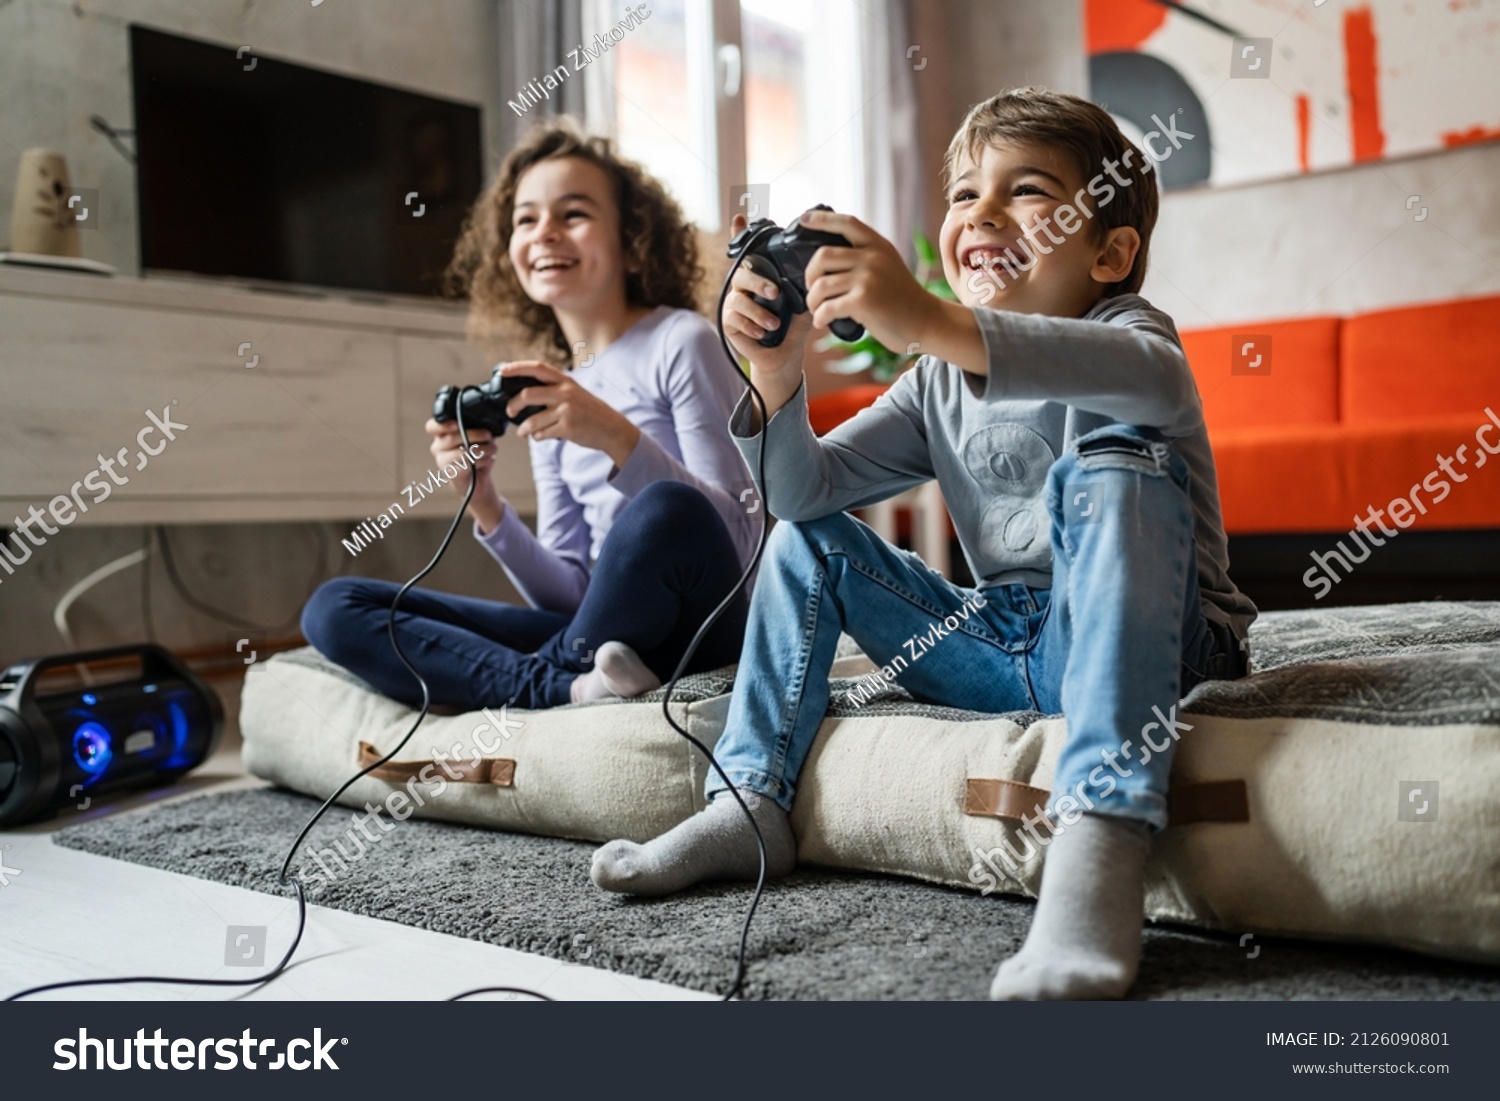 Two children small caucasian brother and sister happy children siblings boy and girl playing video game console using joystick or controller while sitting at home real people family leisure concept #2126090801